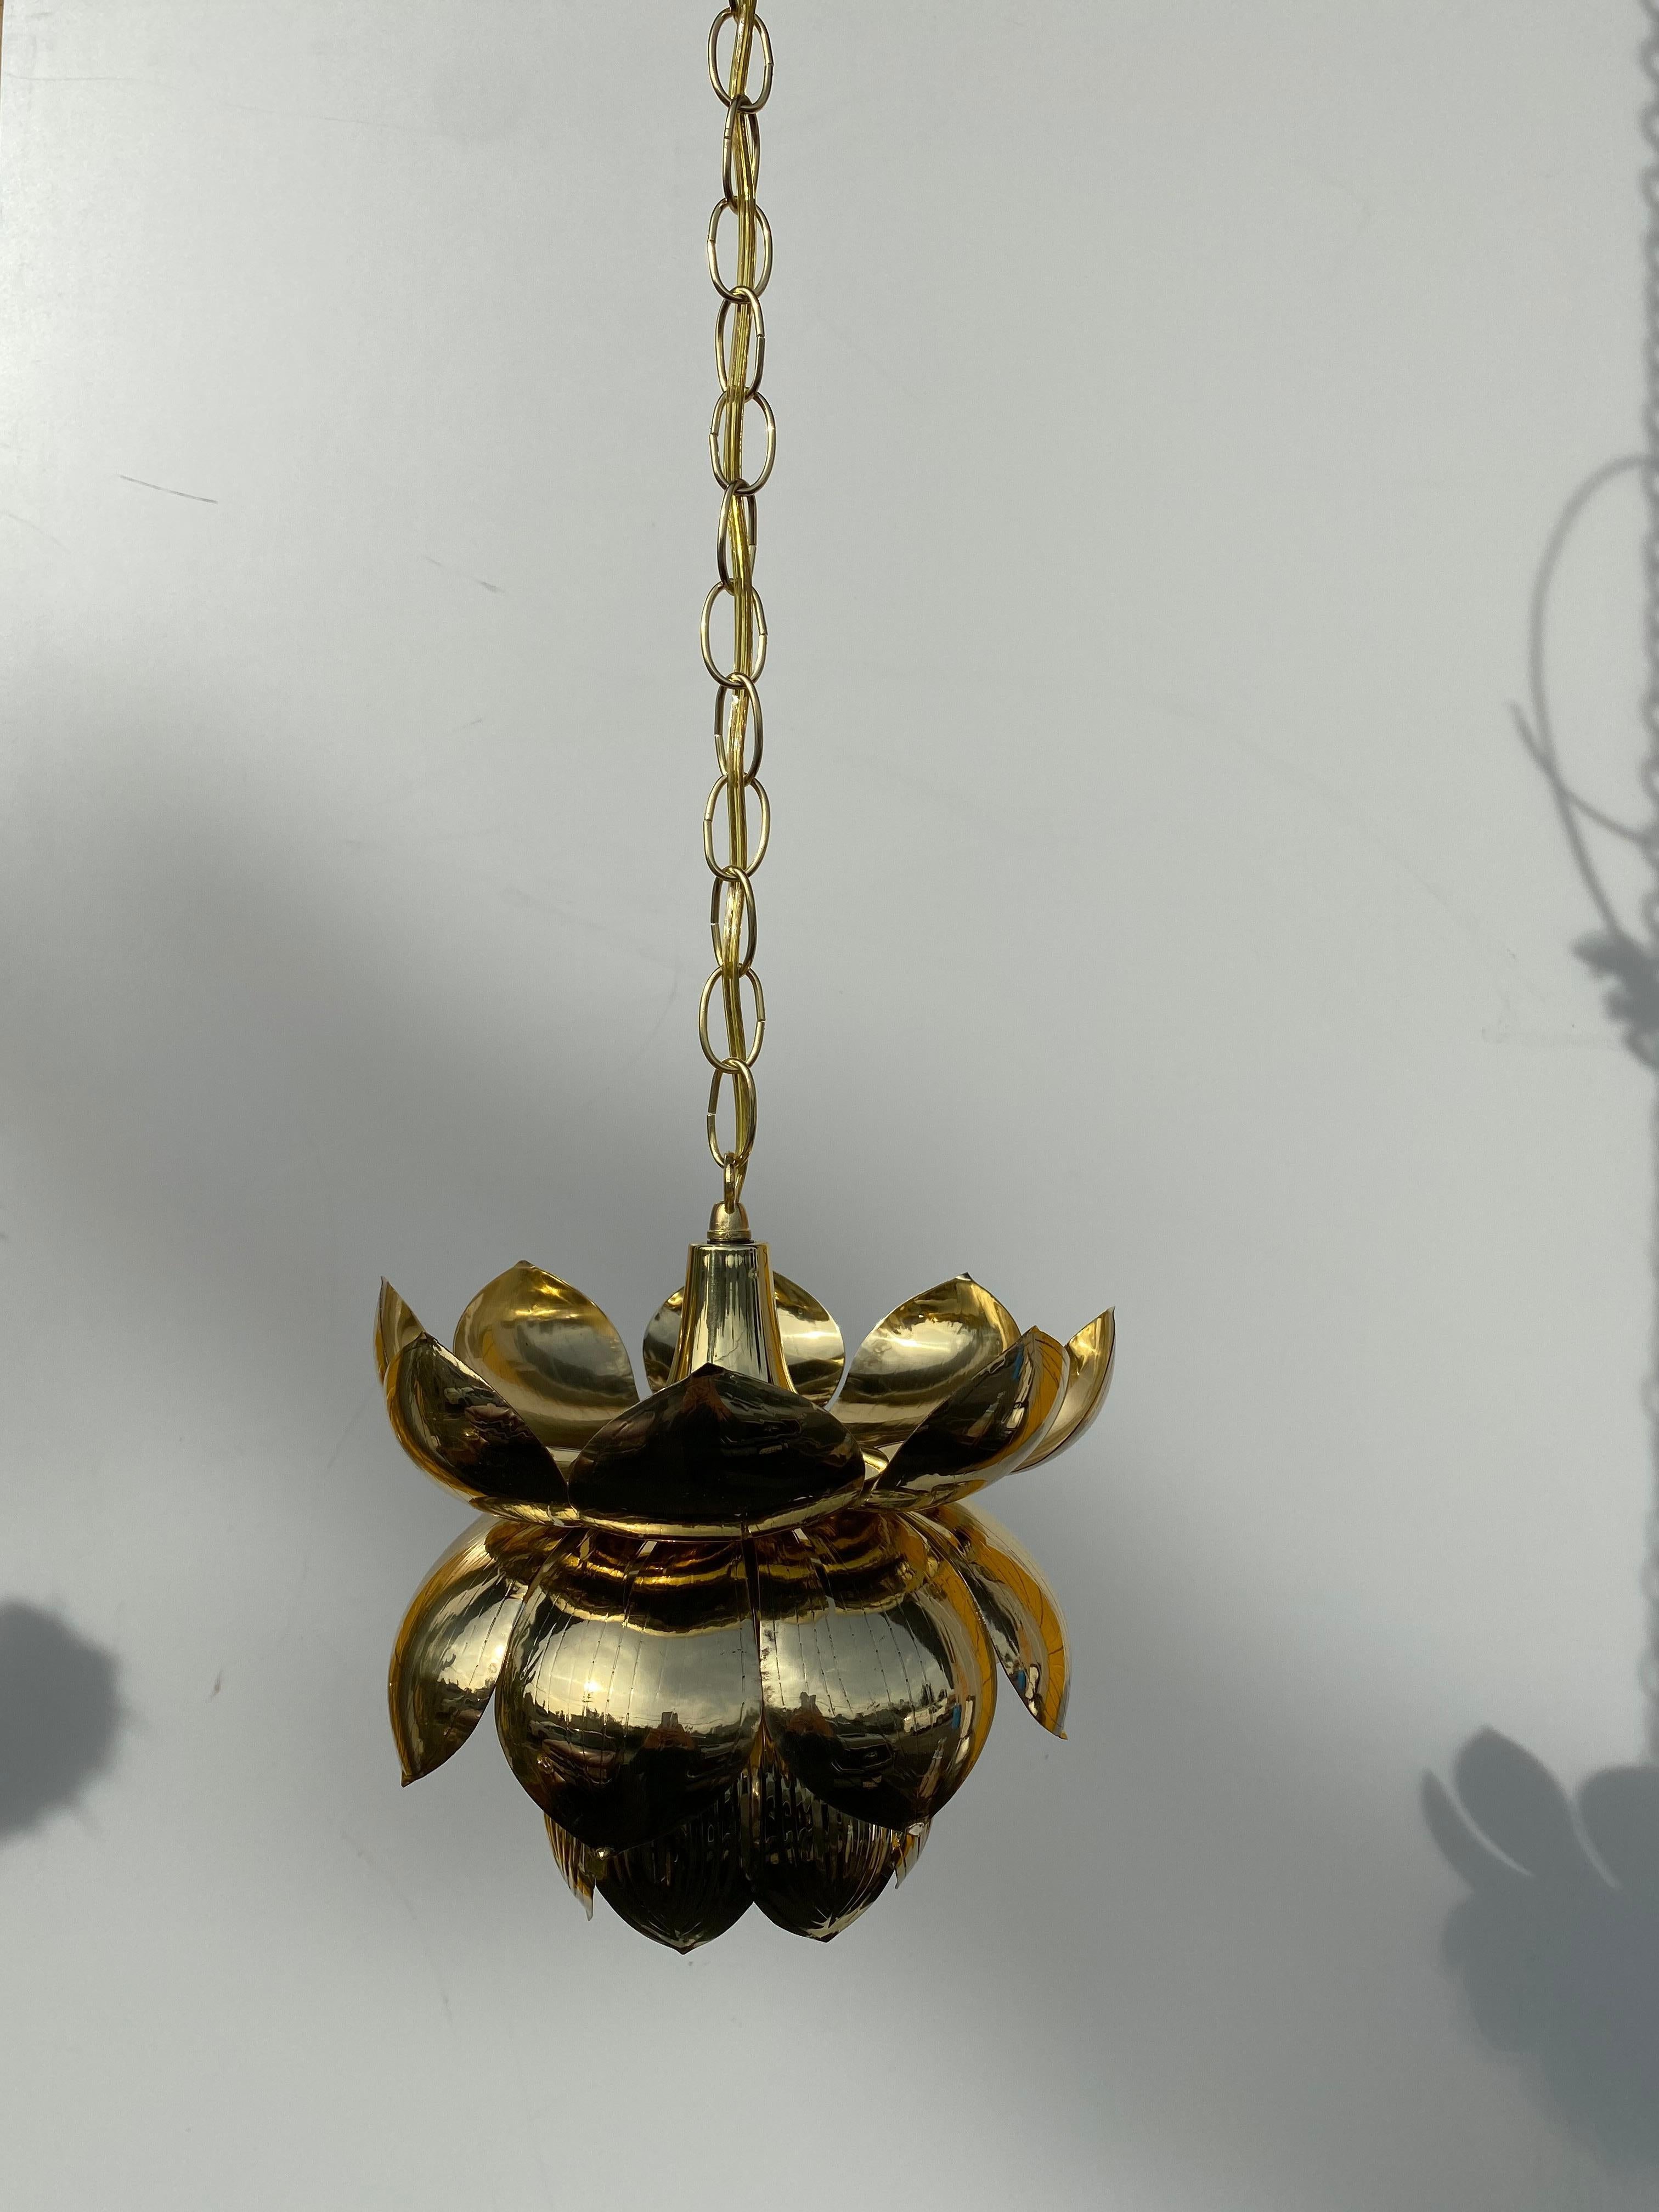 Brass lotus pendant attributed to Feldman. Requires one up to 60watt regular bulb. Comes with 40